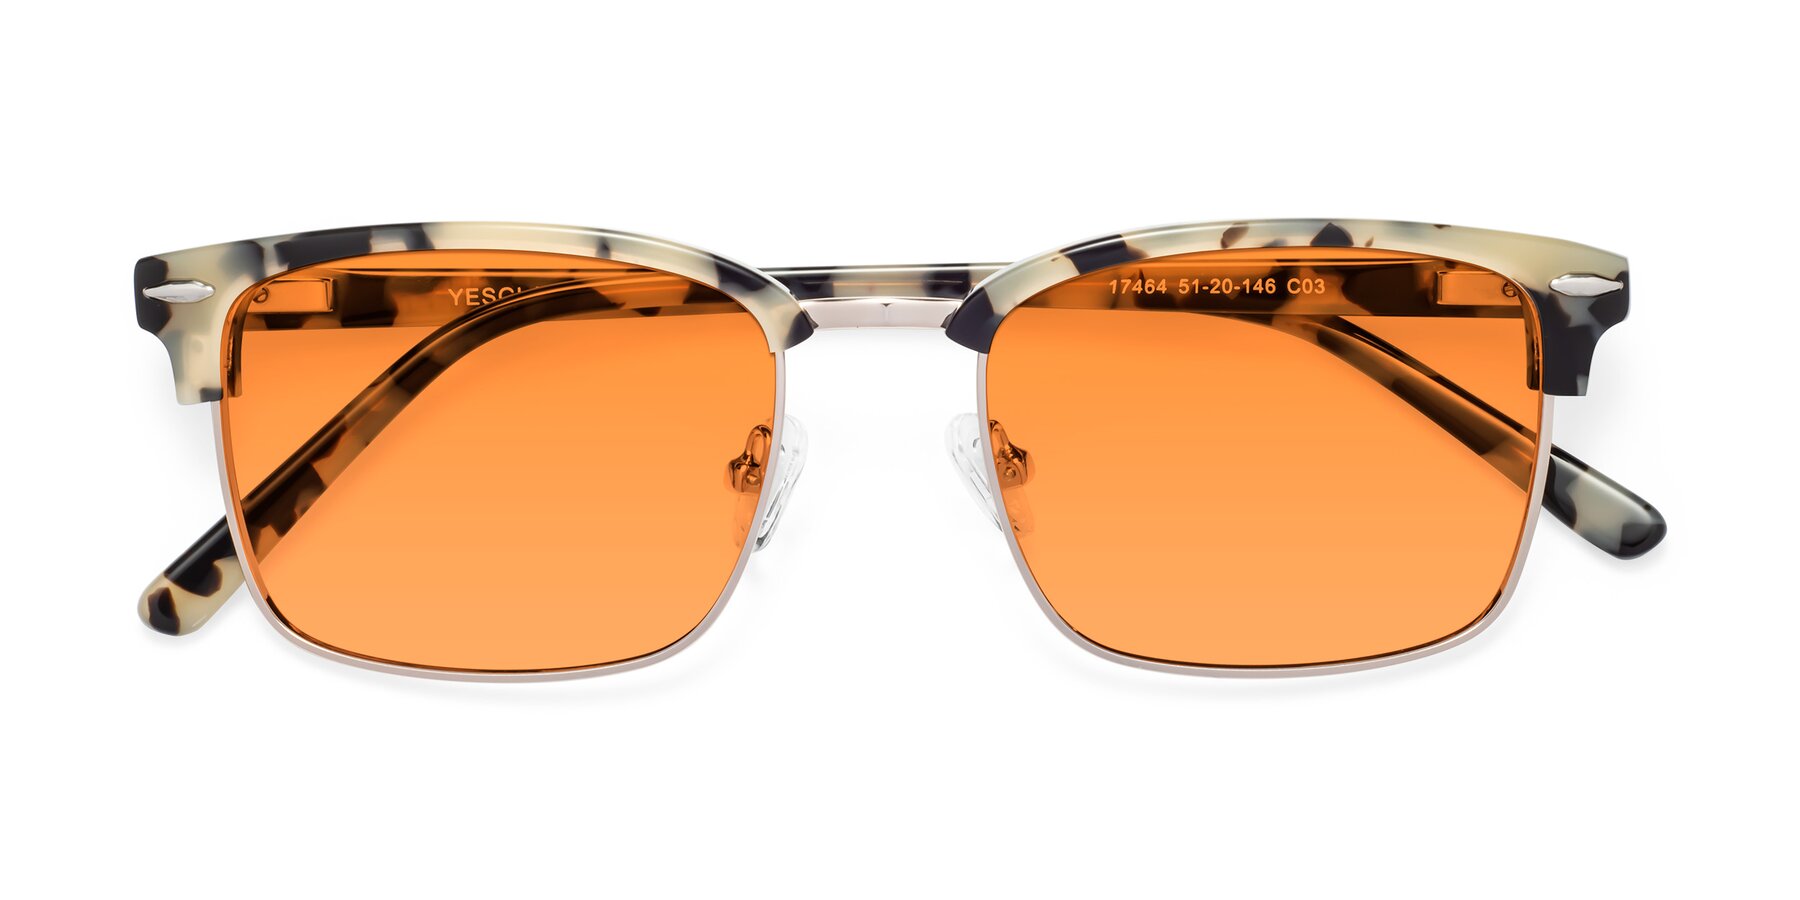 Folded Front of 17464 in Tortoise-Gold with Orange Tinted Lenses